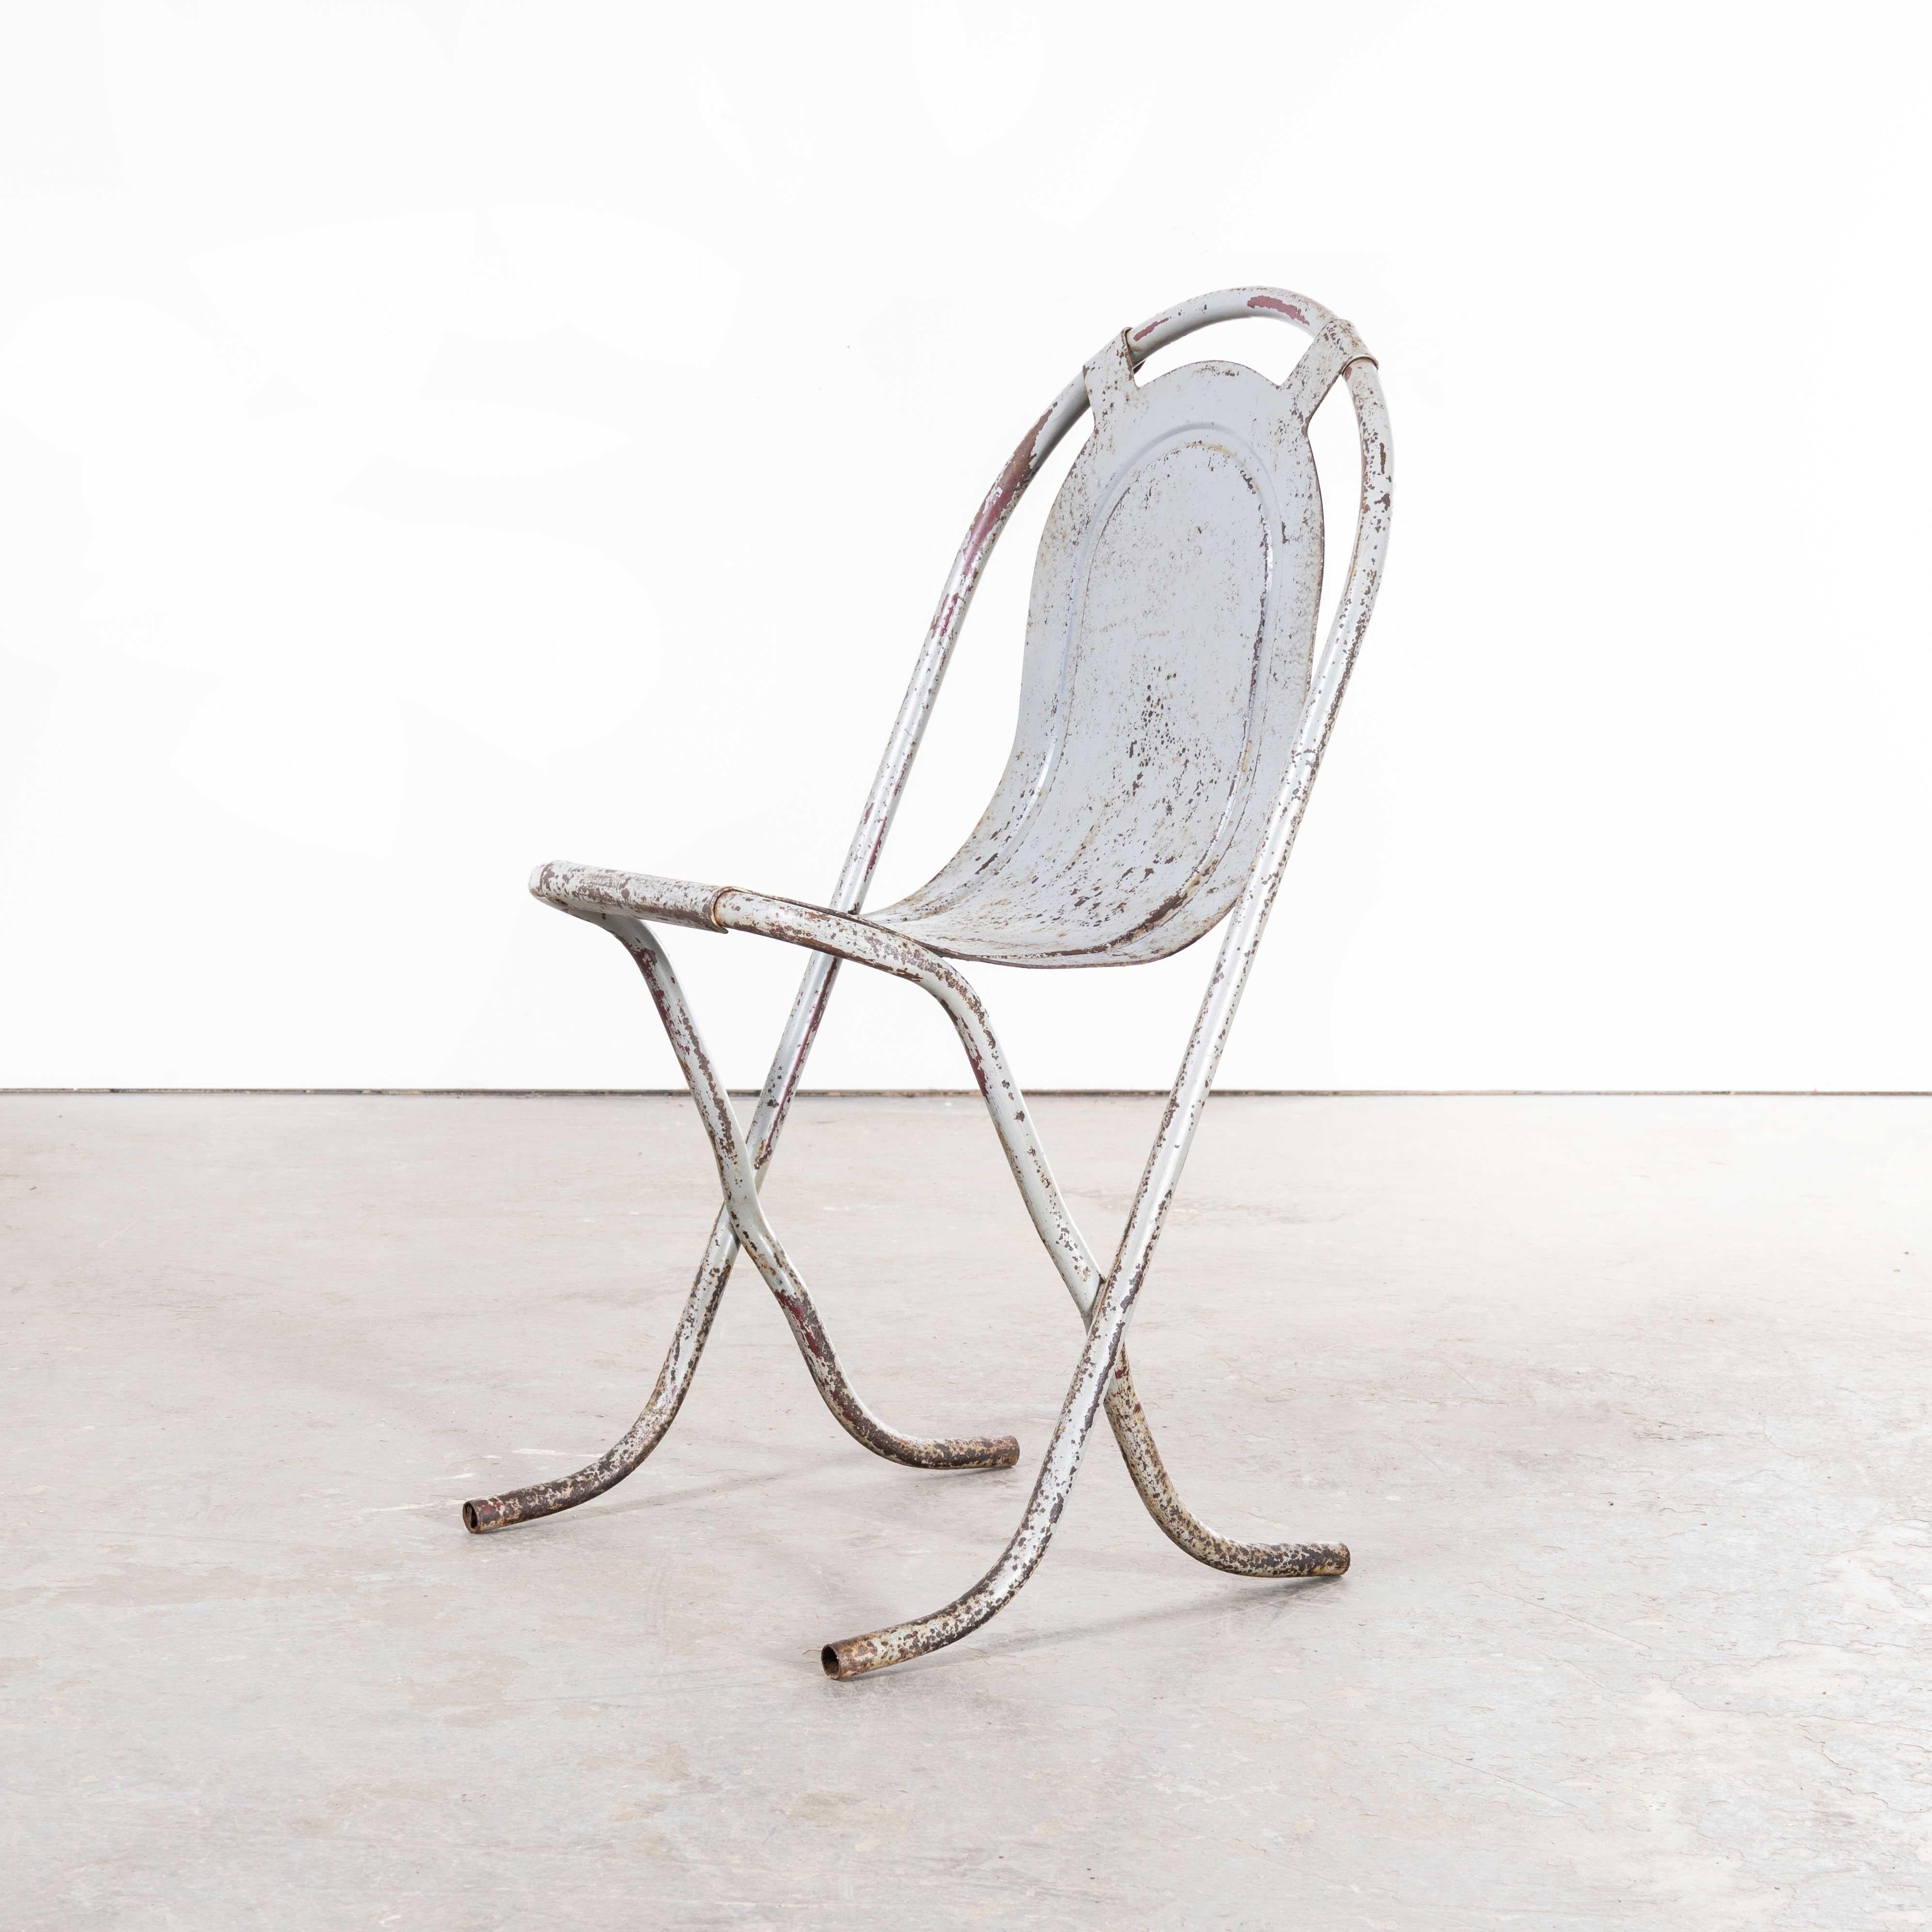 Stainless Steel 1940s Original British Stak a Bye Chairs, Grey, Quantity Available For Sale